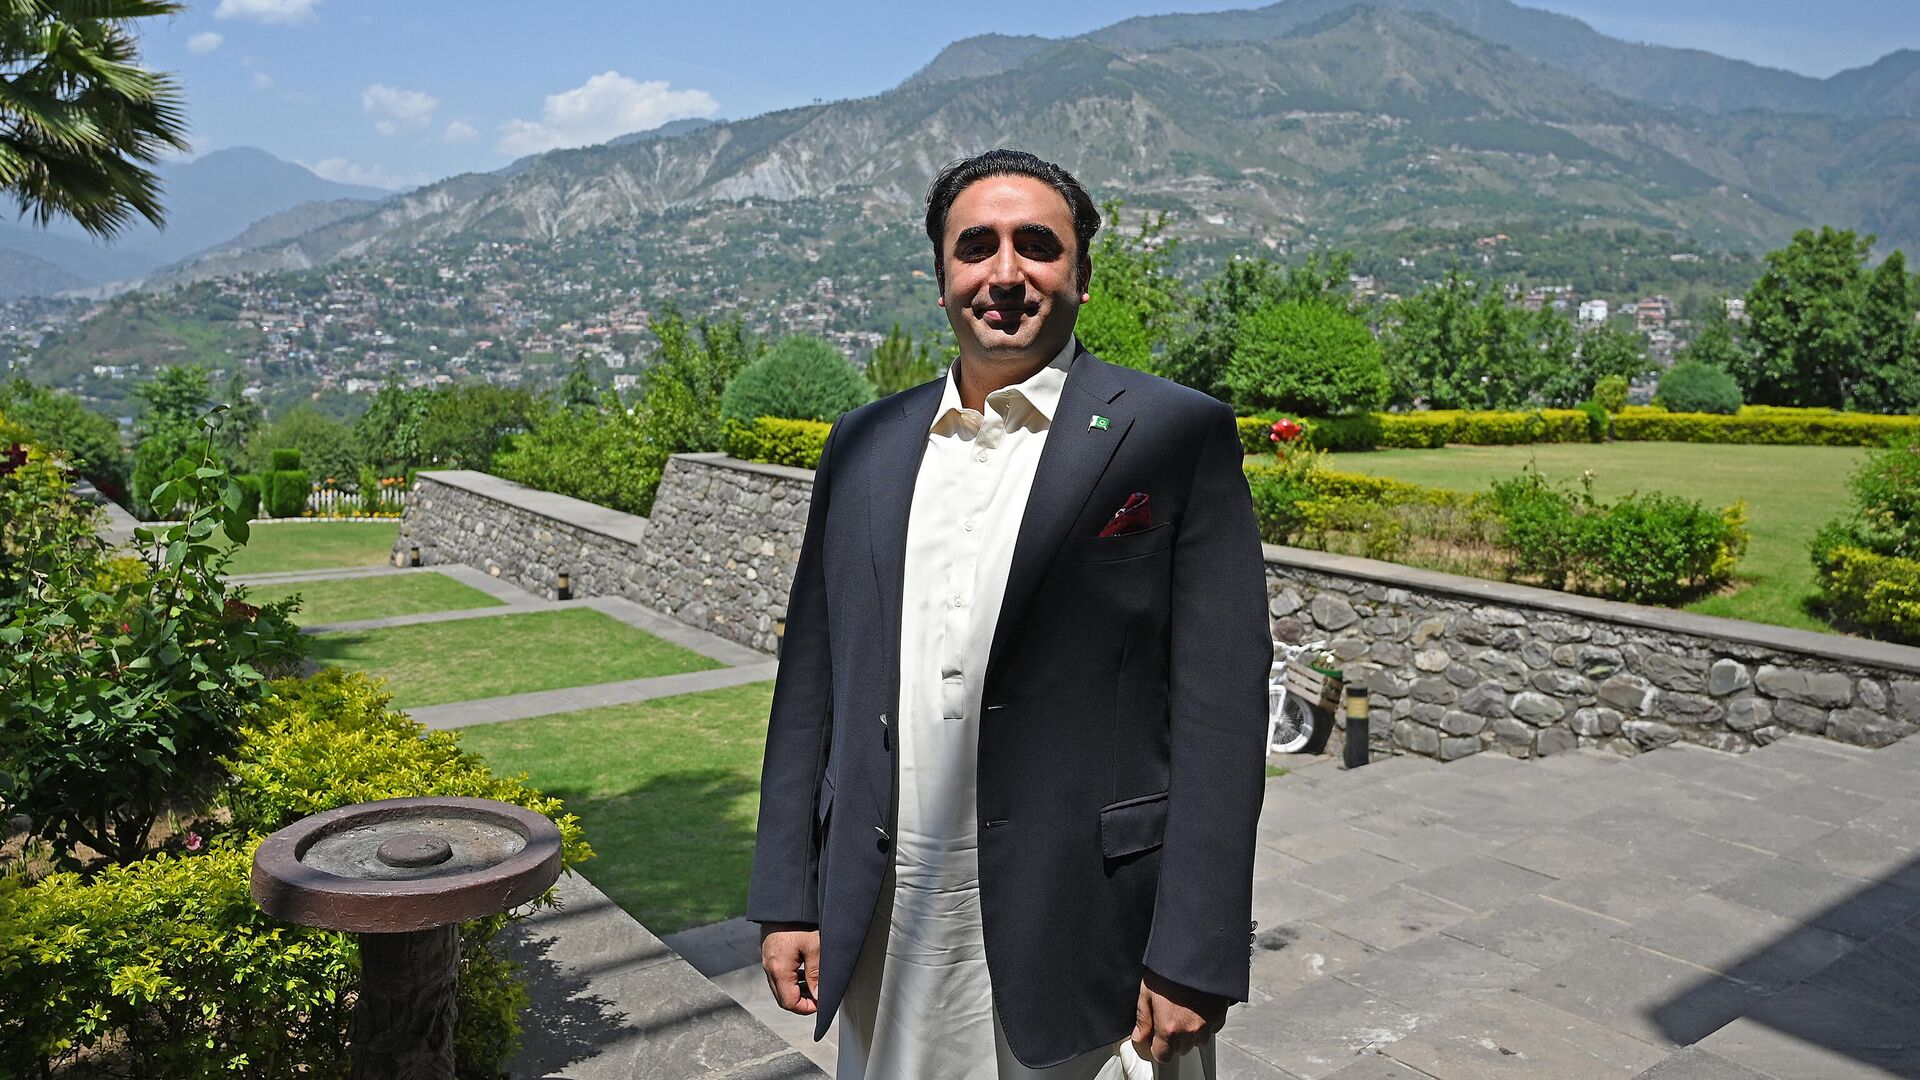 Pakistan's Foreign Minister Bilawal Bhutto Zardari poses after an interview with AFP in Muzaffarabad, the capital of Pakistan-administered Kashmir on May 22, 2023. - Sputnik India, 1920, 22.05.2023